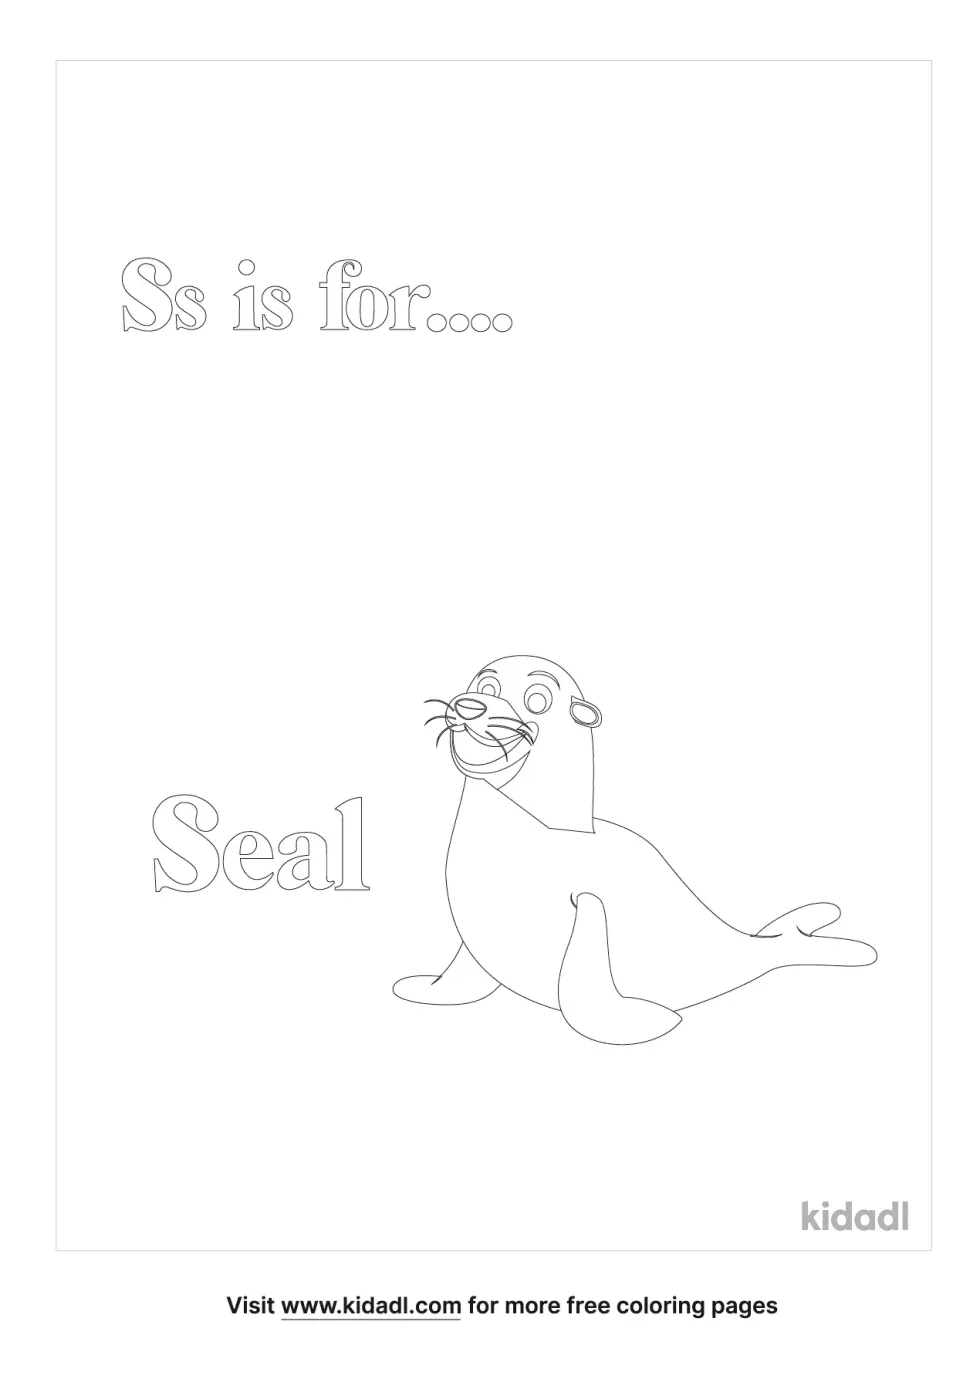 S For Seal